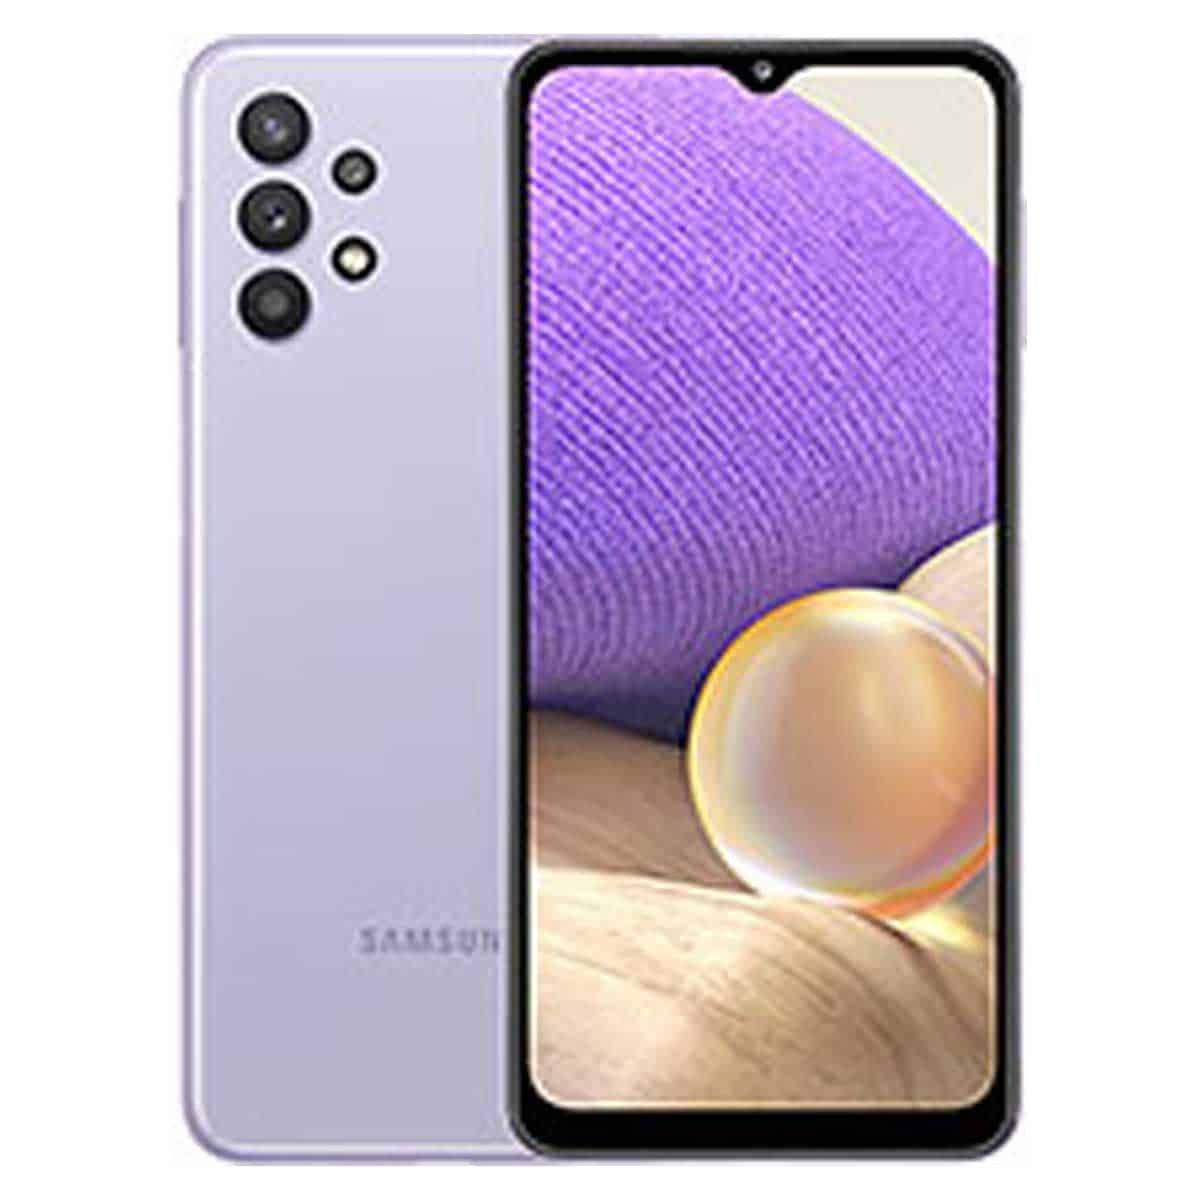 Samsung Galaxy A32 4G Official: Why is it better than the 5G Variant